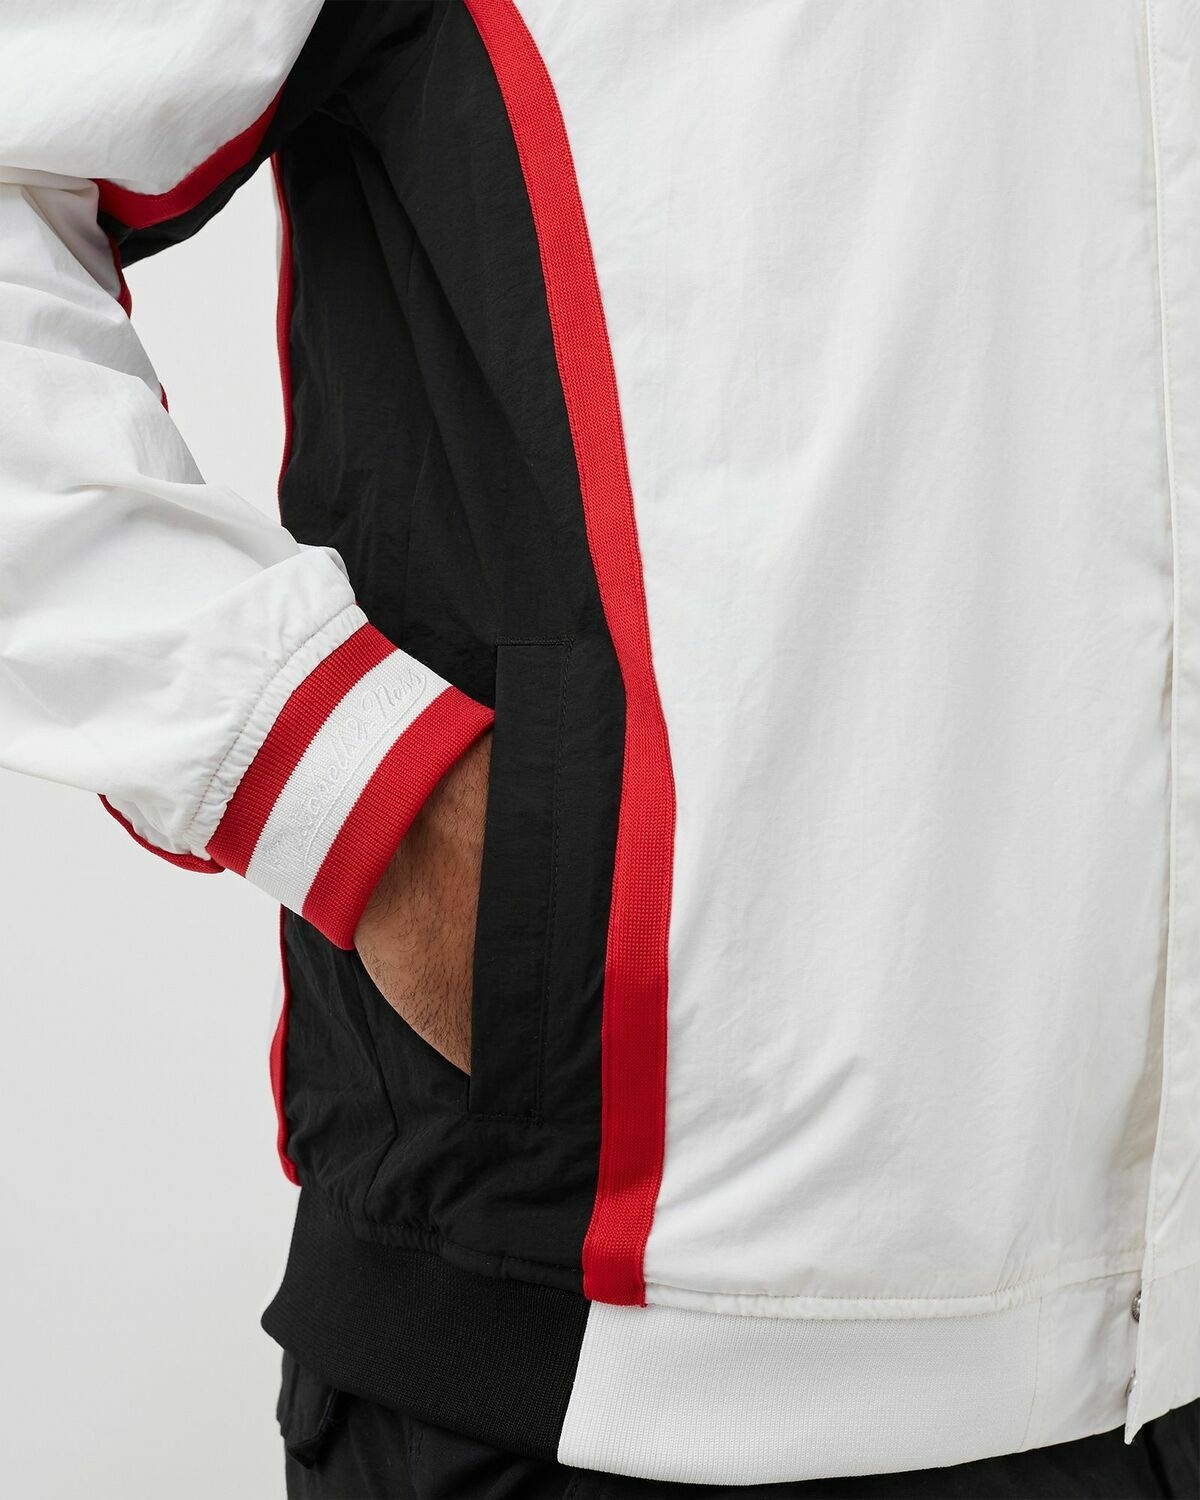 Mitchell & Ness Nba Authentic Warm Up Jacket Chicago Bulls 1992 93 White - Mens - College Jackets/Track Jackets